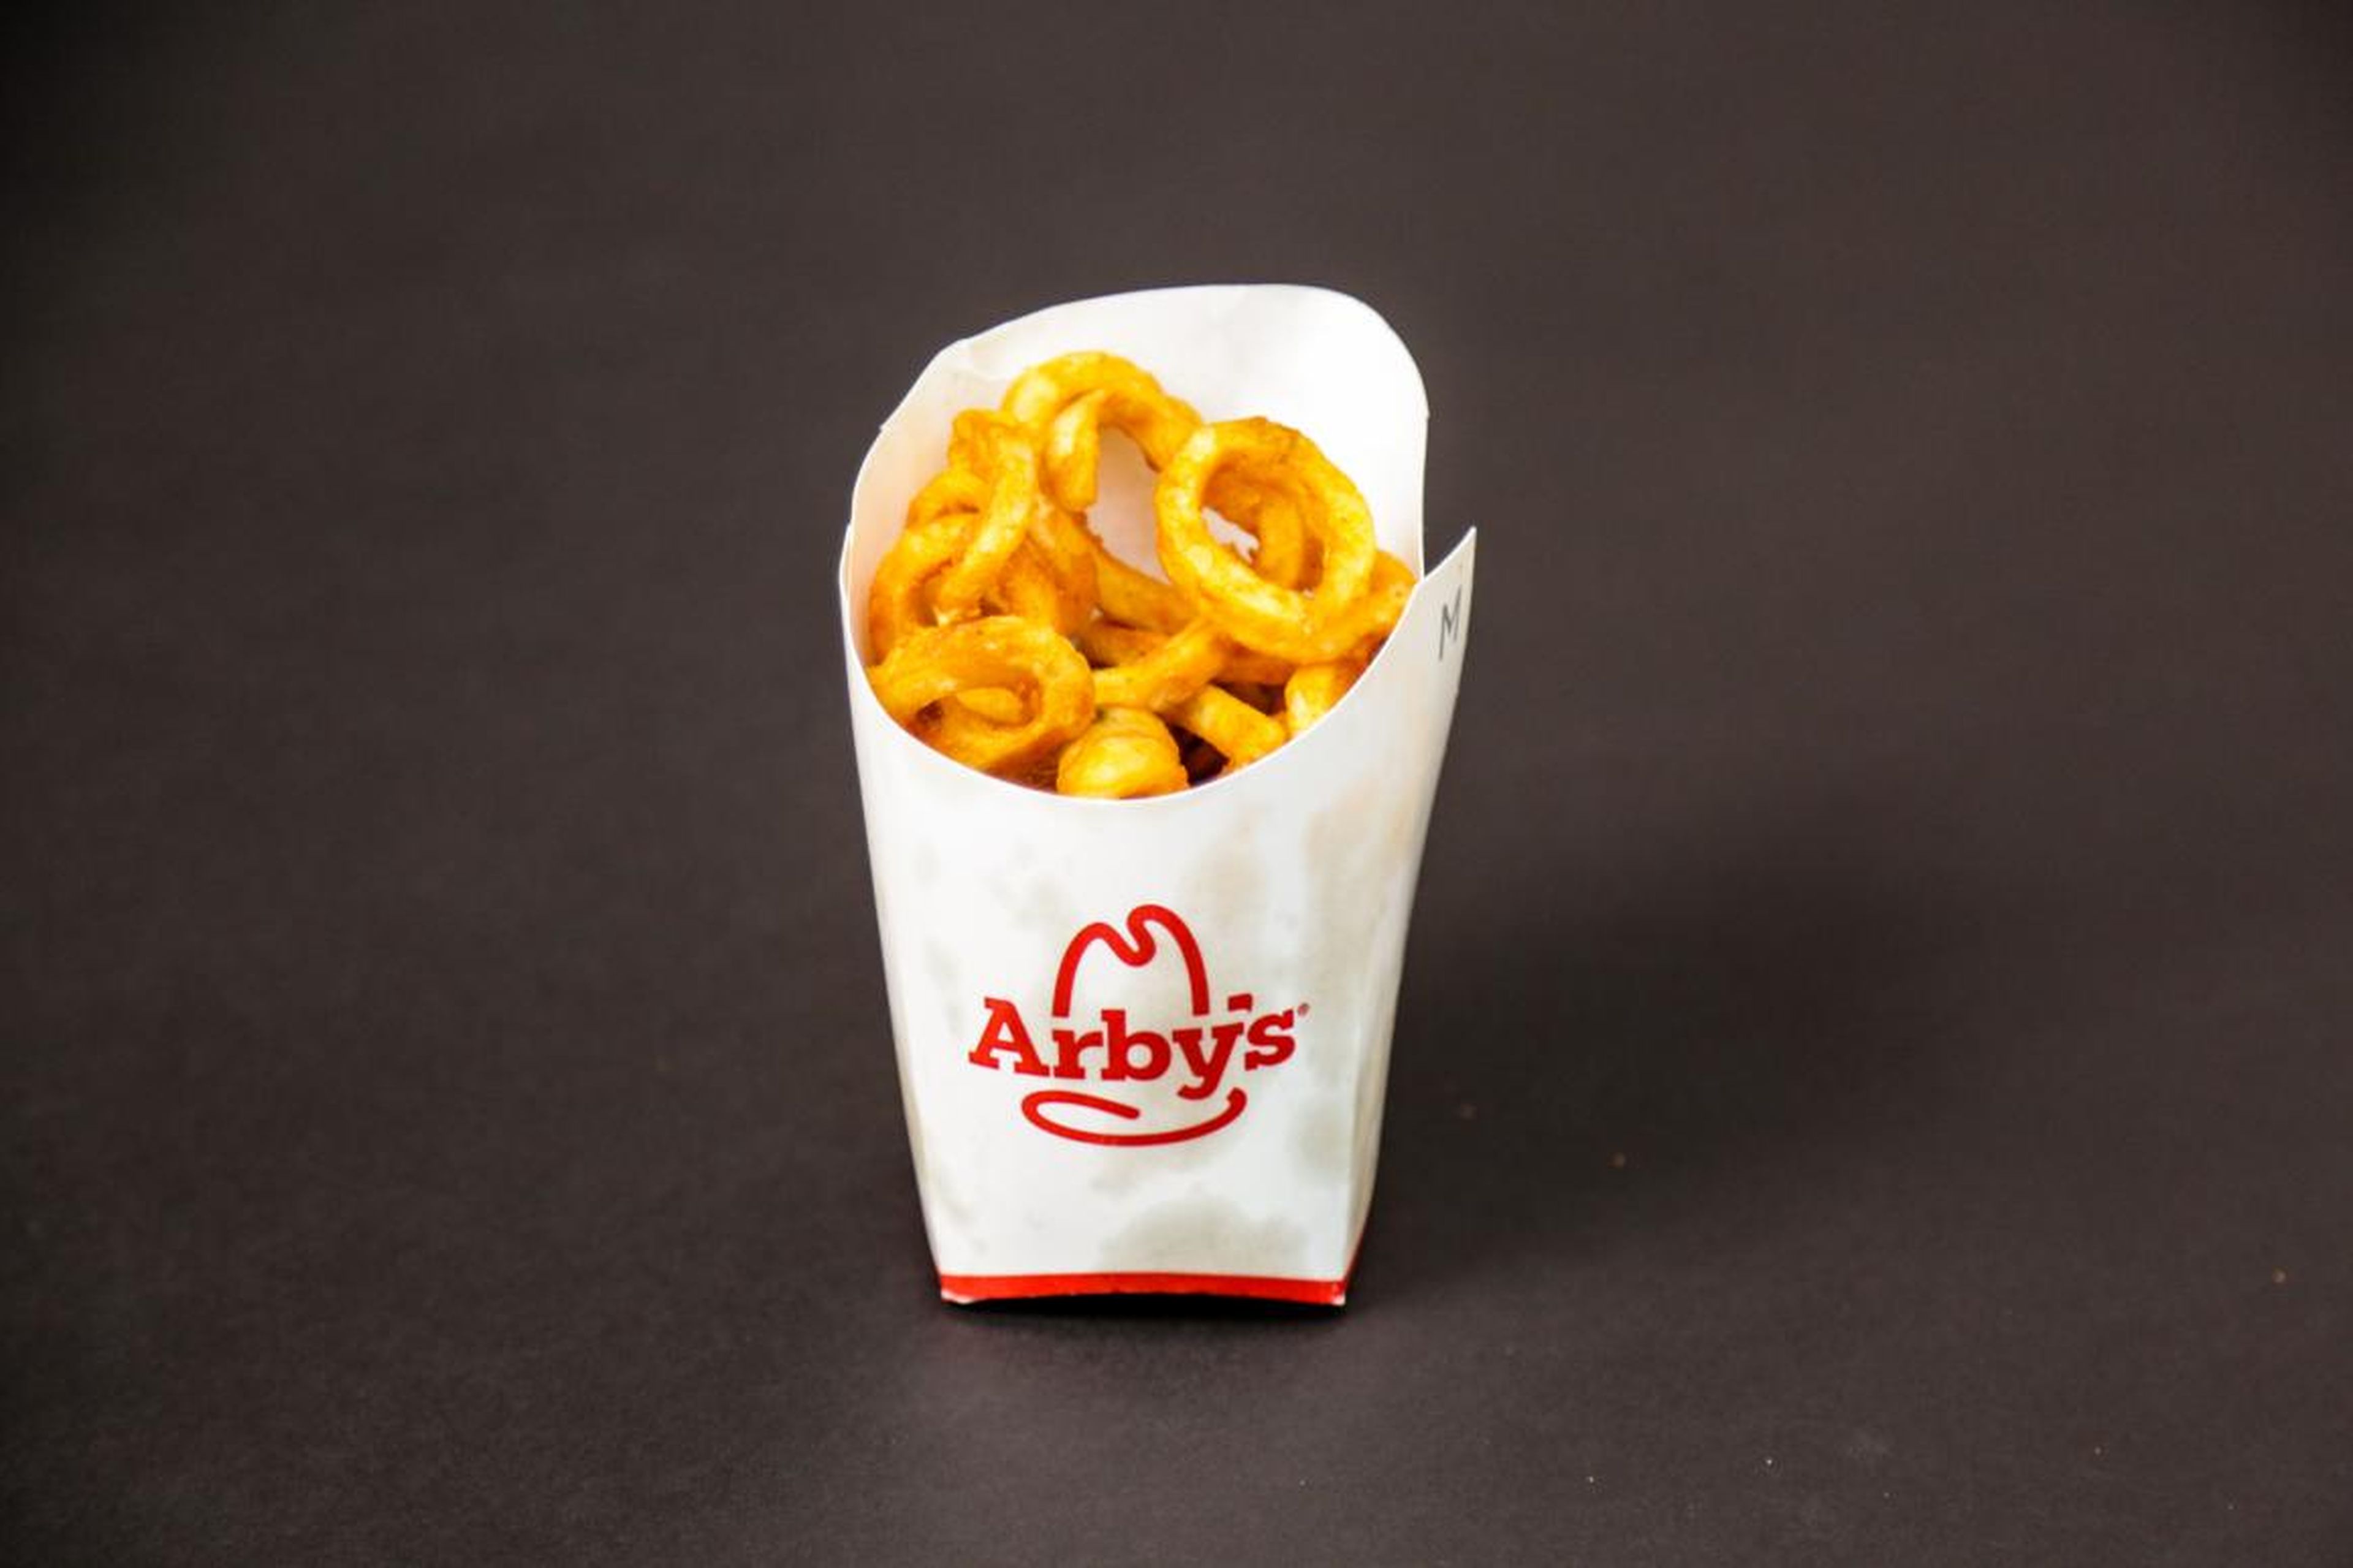 Arby's enters the arena with the most eye-catching contestant. With curves for miles and a fiery personality, Arby's fries immediately call to mind a hot summer day at a state fair.